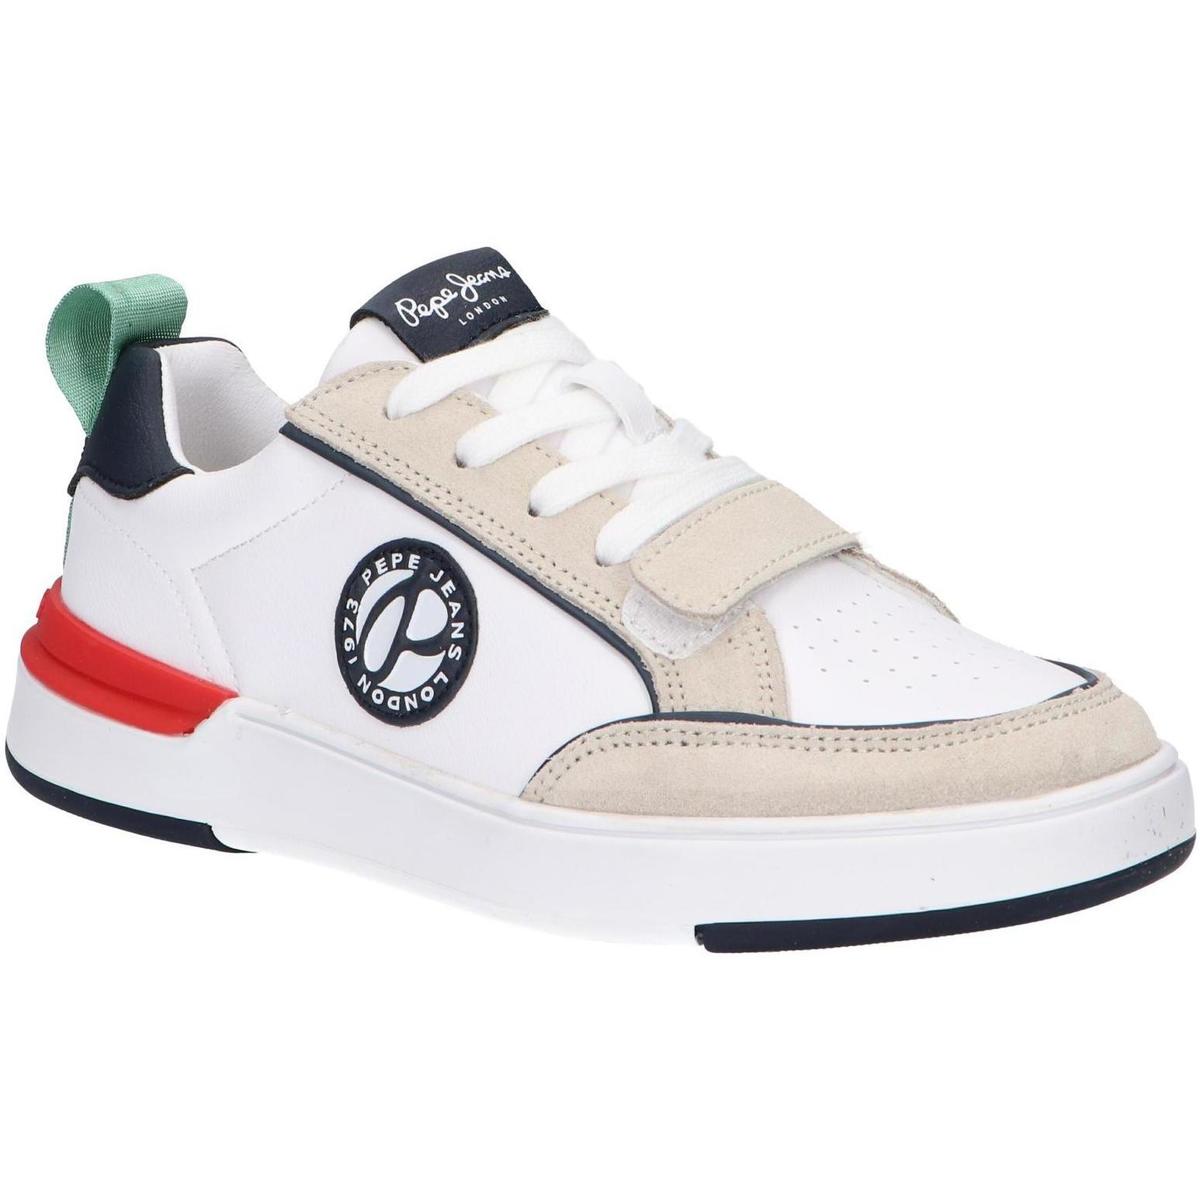 Chaussures Enfant Multisport Pepe jeans PBS30524 BAXTER PATCH PBS30524 BAXTER PATCH 